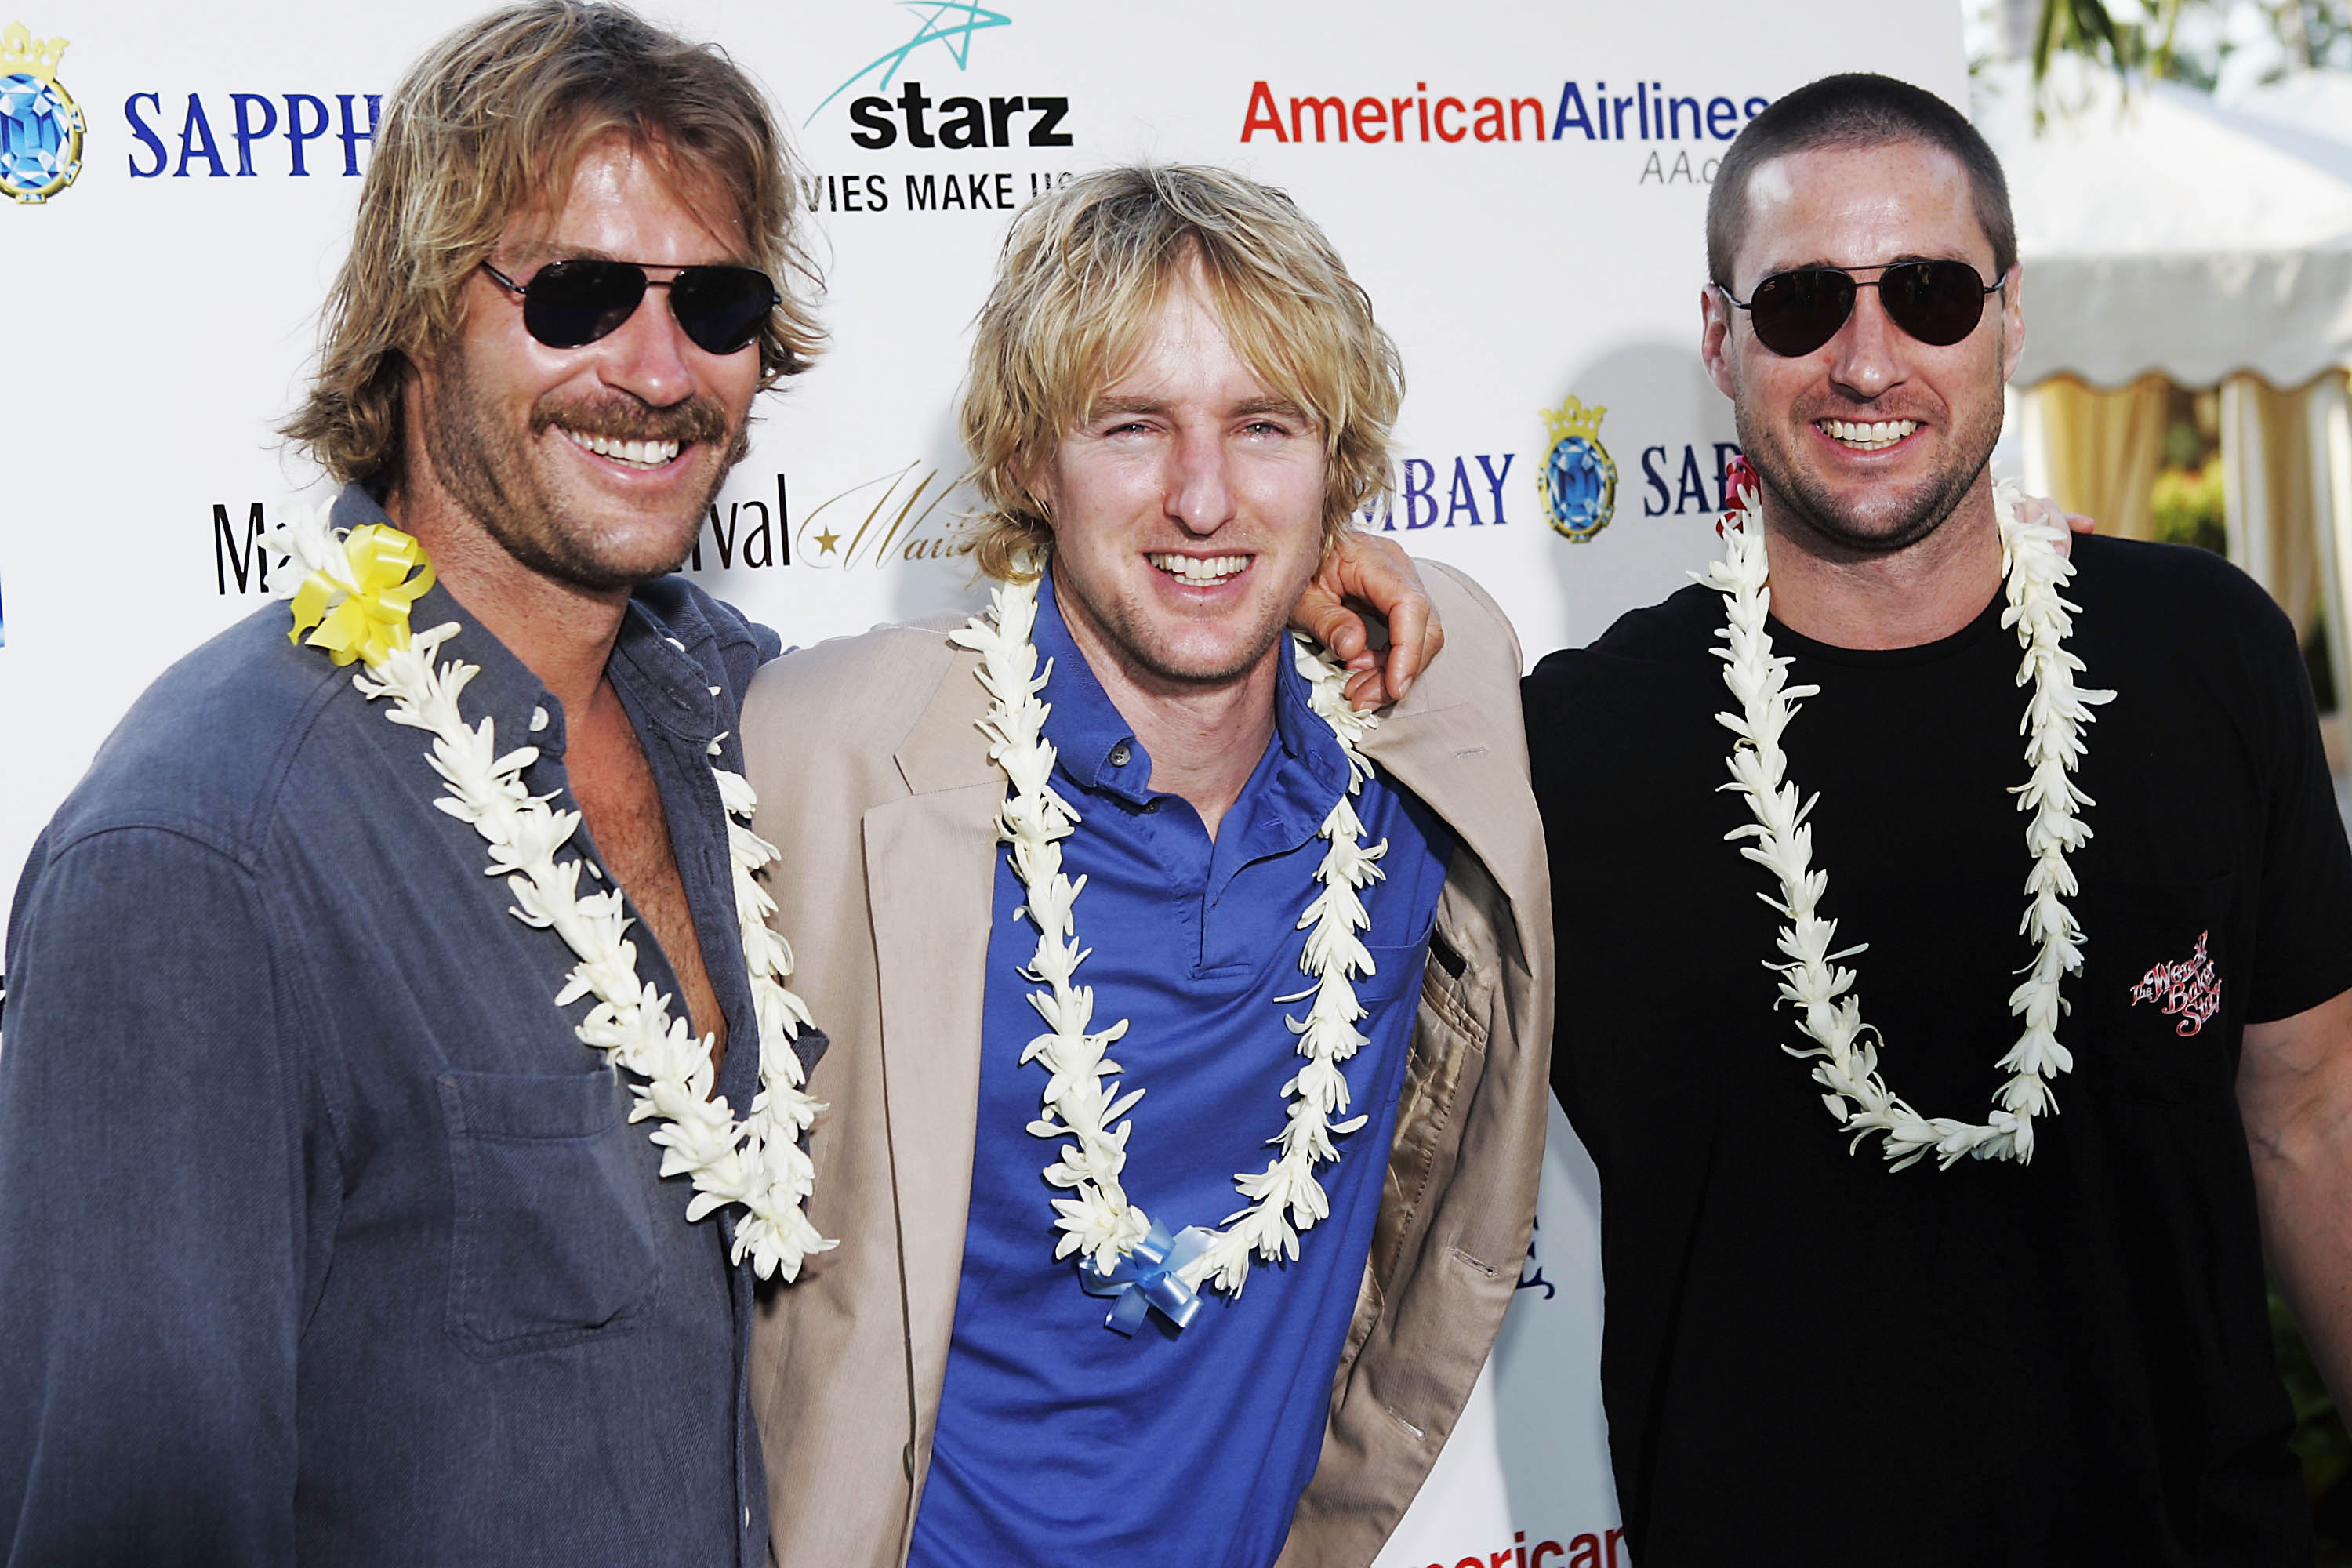 Andrew, Owen and Luke Wilson attend A Tribute To The Wilson Brothers, part of the Maui Film Festival, in Wailea, Hawaii, on June 16, 2005. | Source: Getty Images